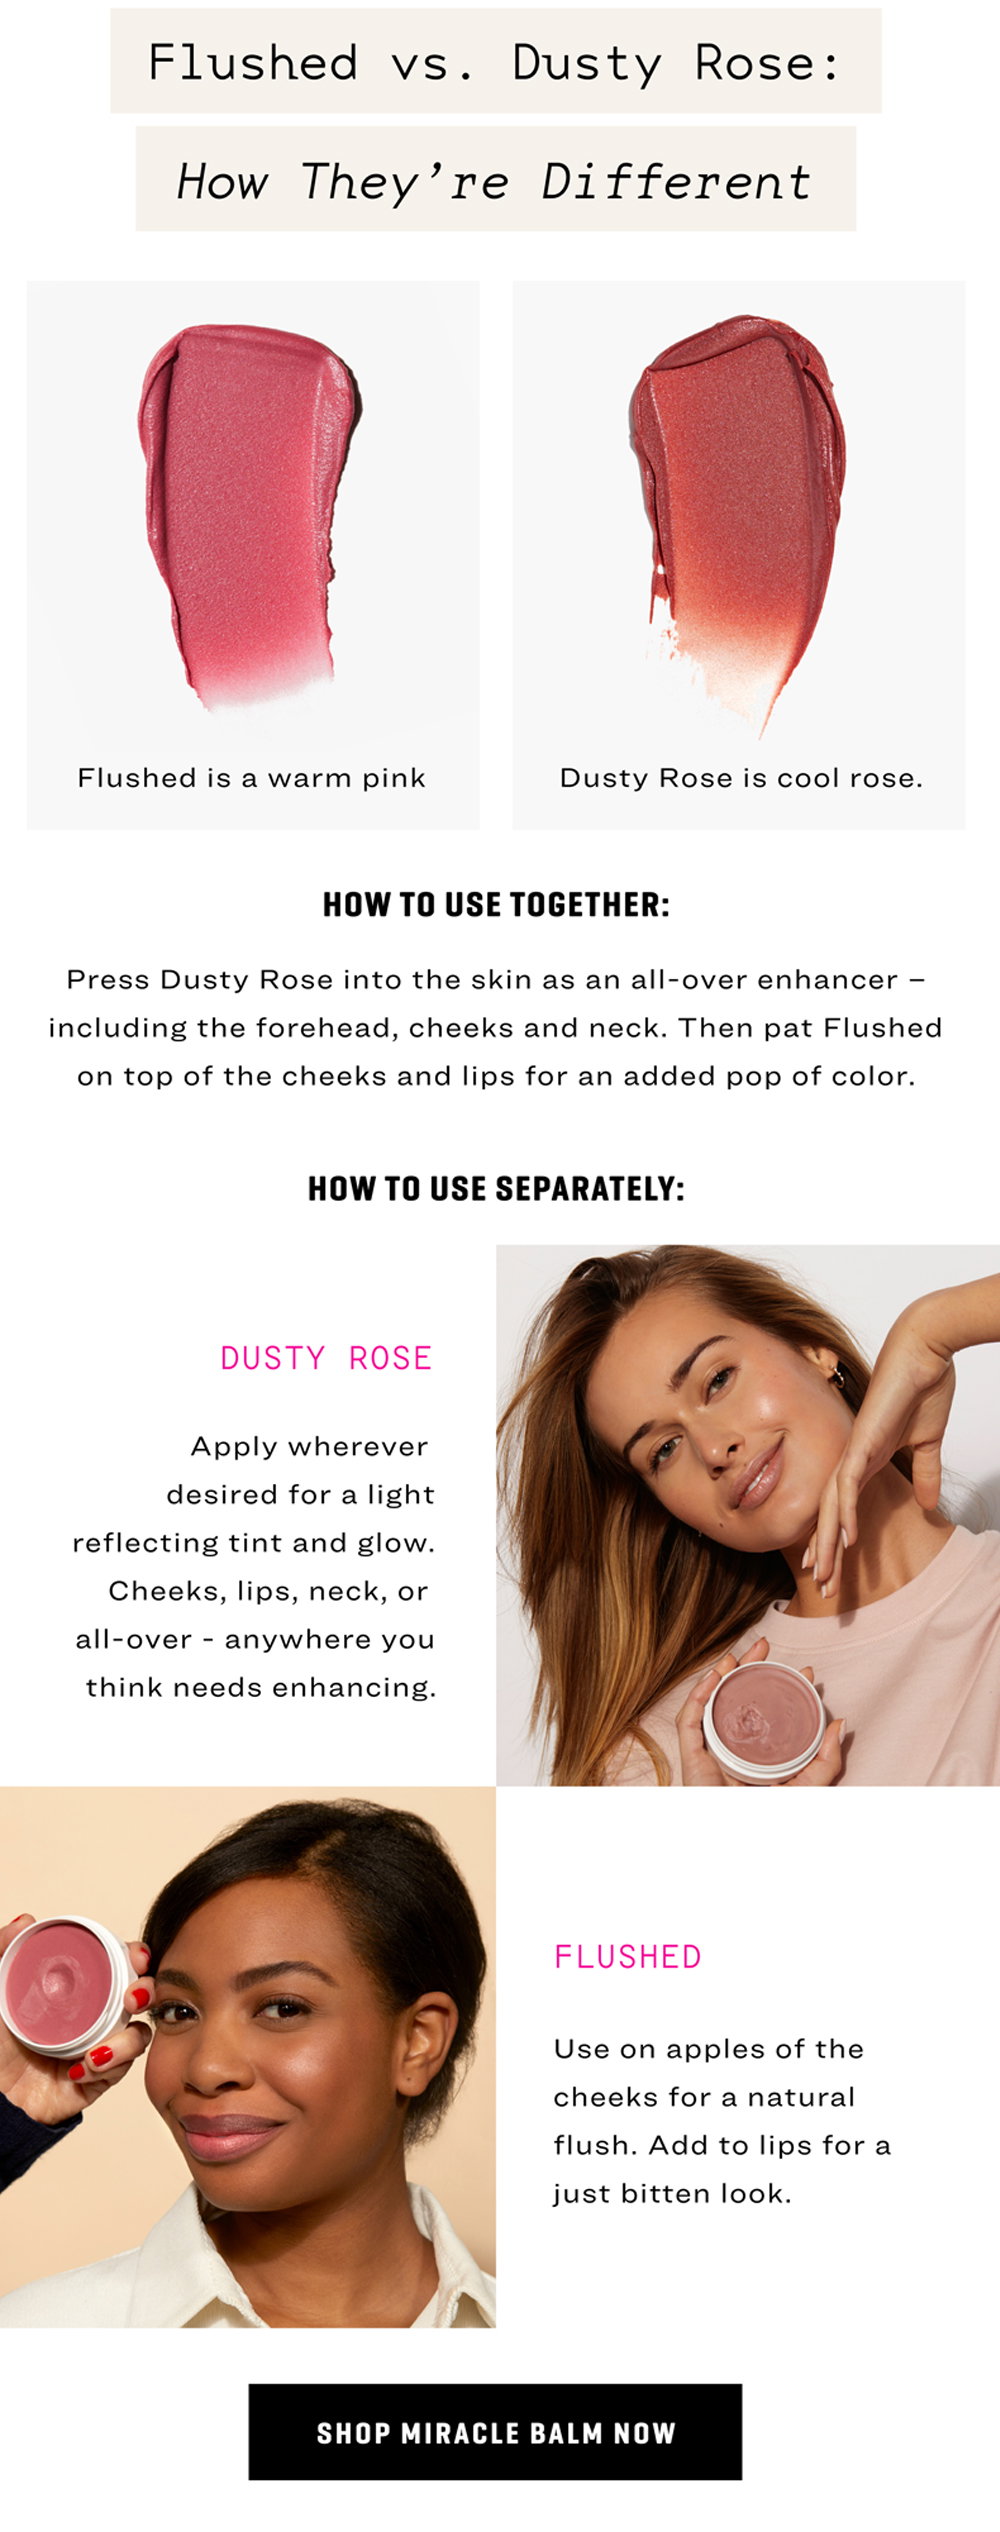 Jones Road Beauty: The difference between Flushed and Dusty Rose